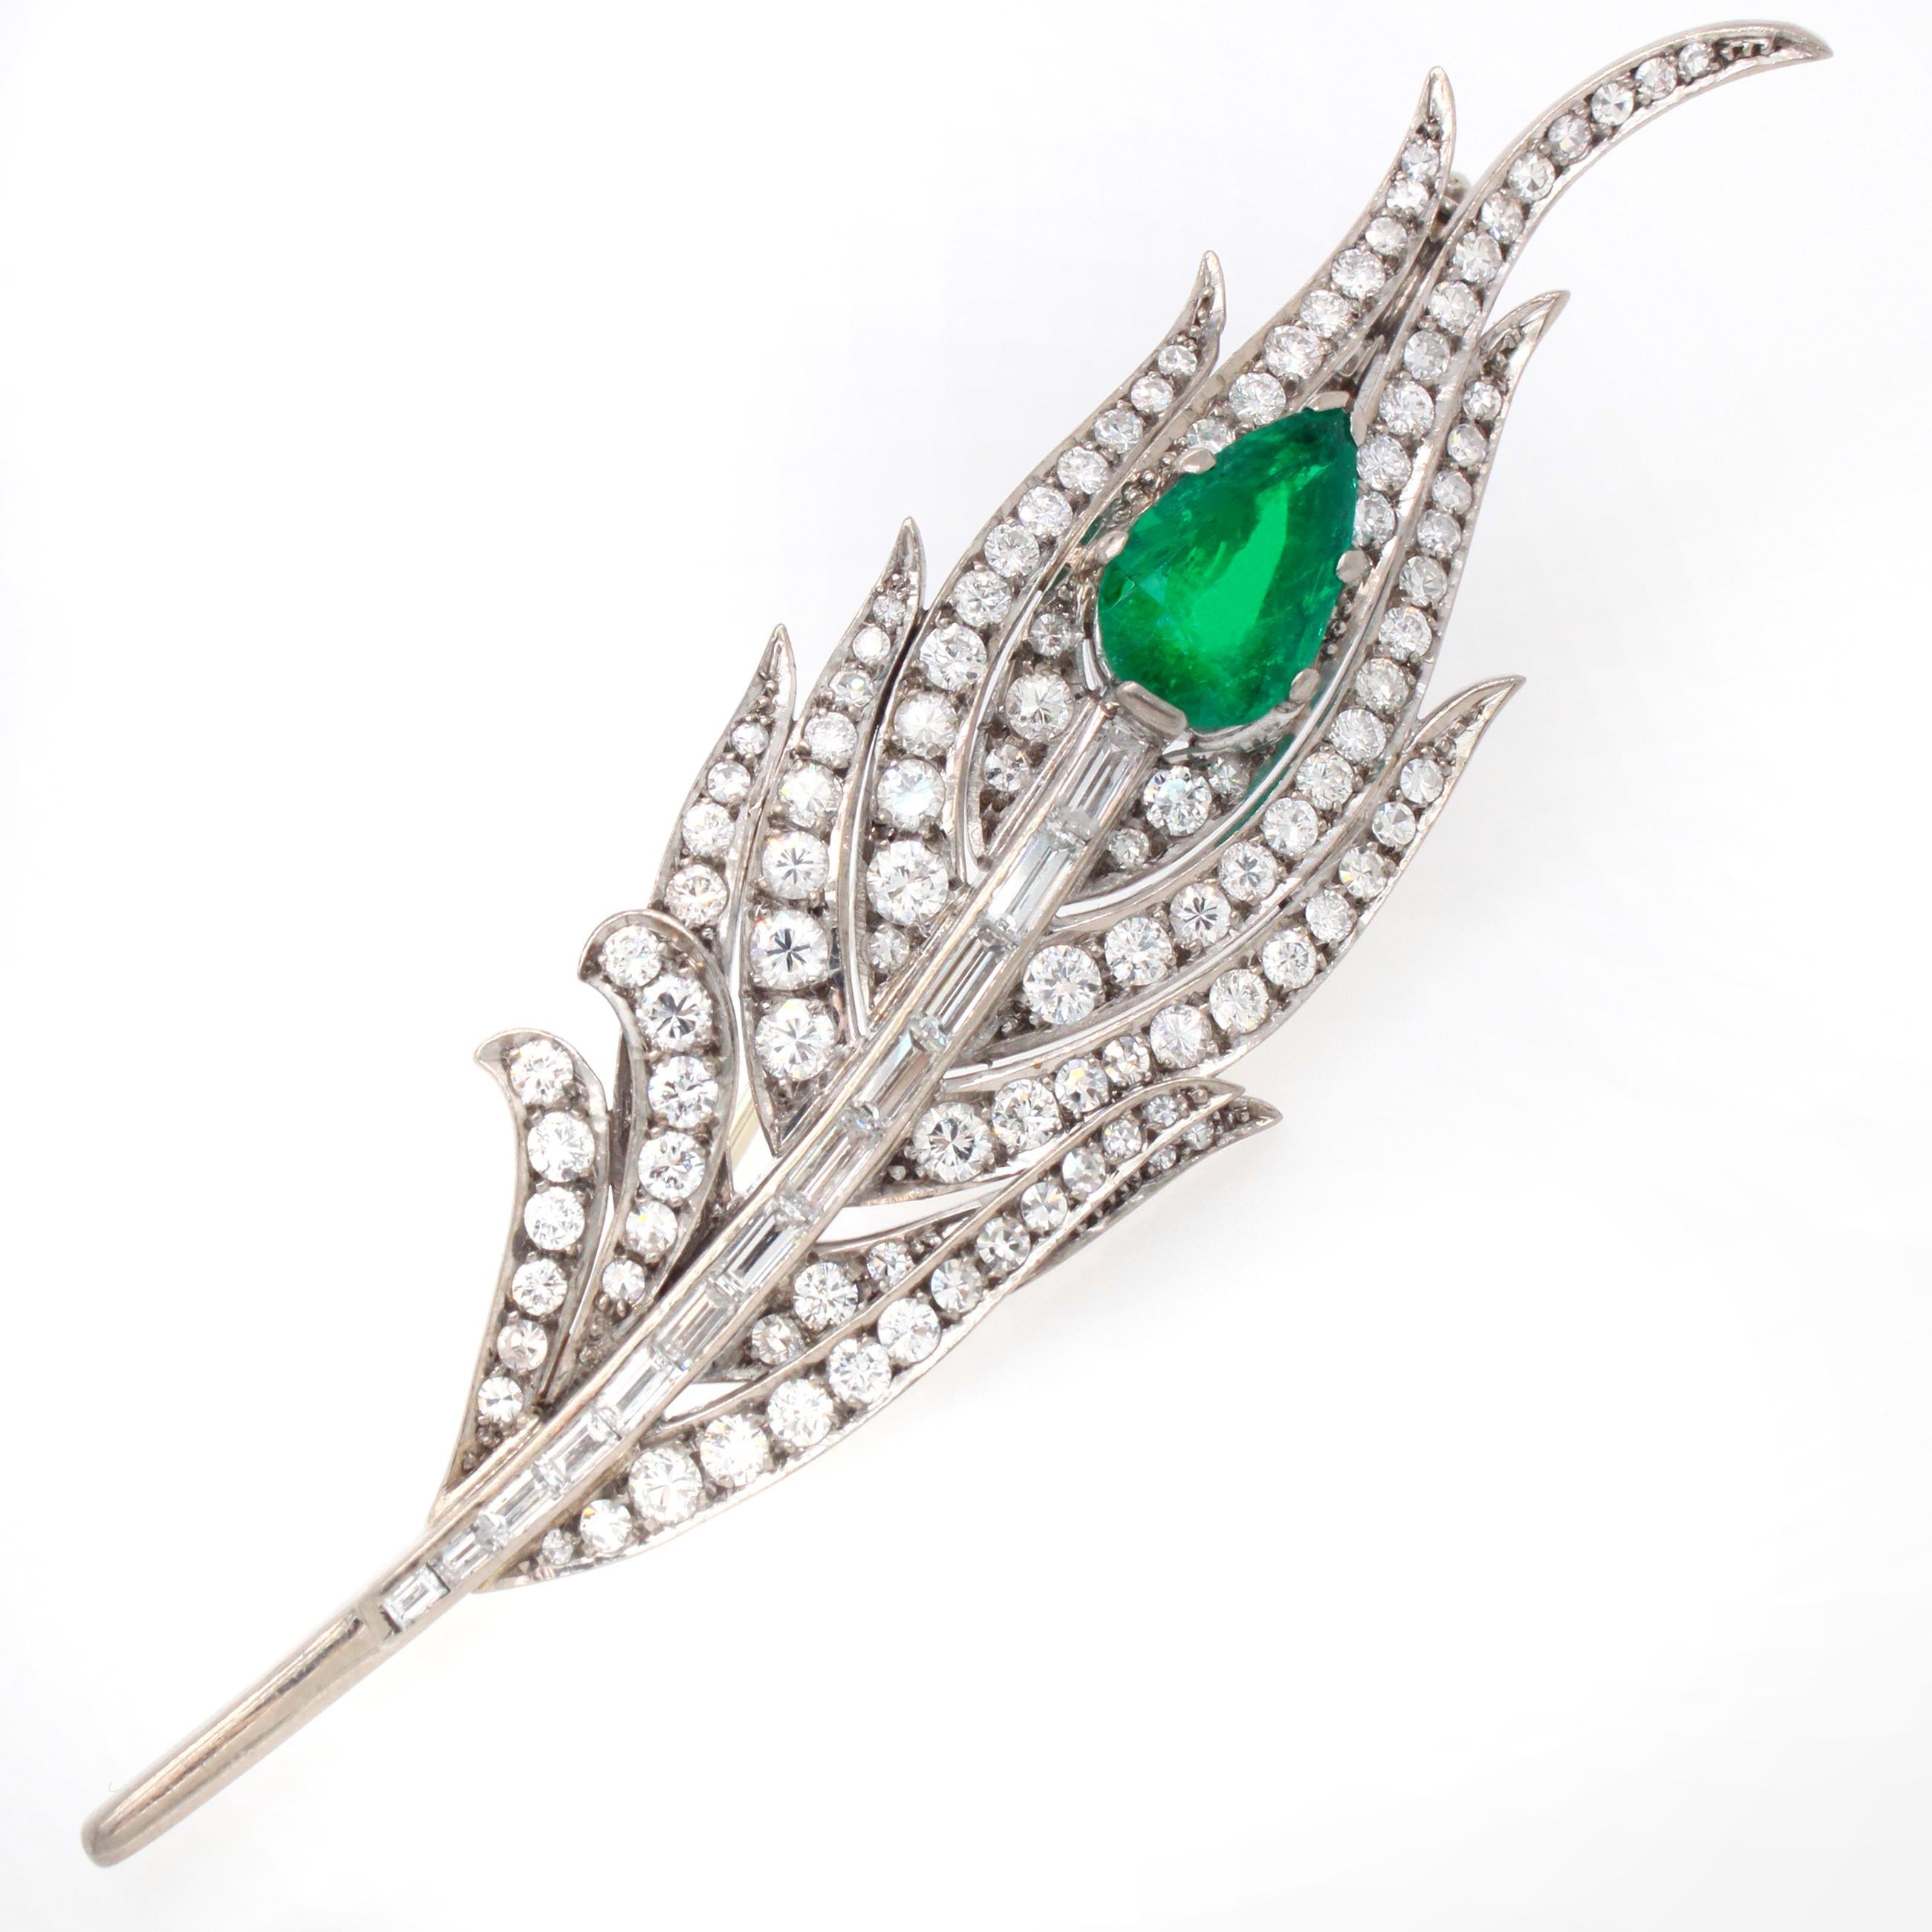 An emerald and diamond brooch in the design of a peacock feather. The pear shaped emerald has a vivid green colour and beautiful crystal. It weighs approximately 2.75 carats. The individual feathers are set with round brilliant cut diamonds and the